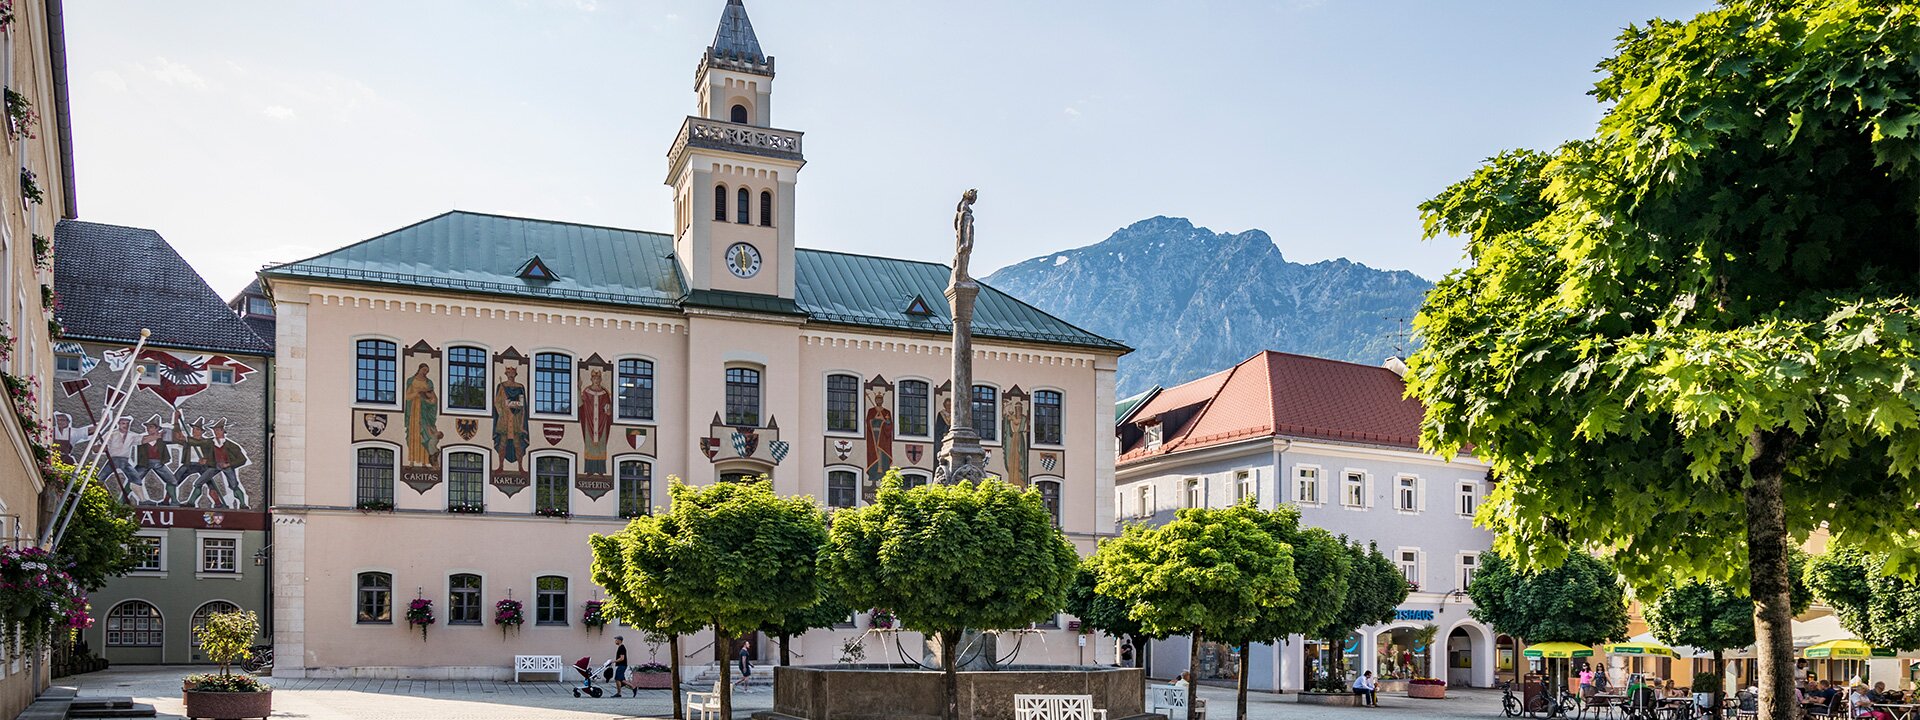 Town Hall Square in Bad Reichenhall